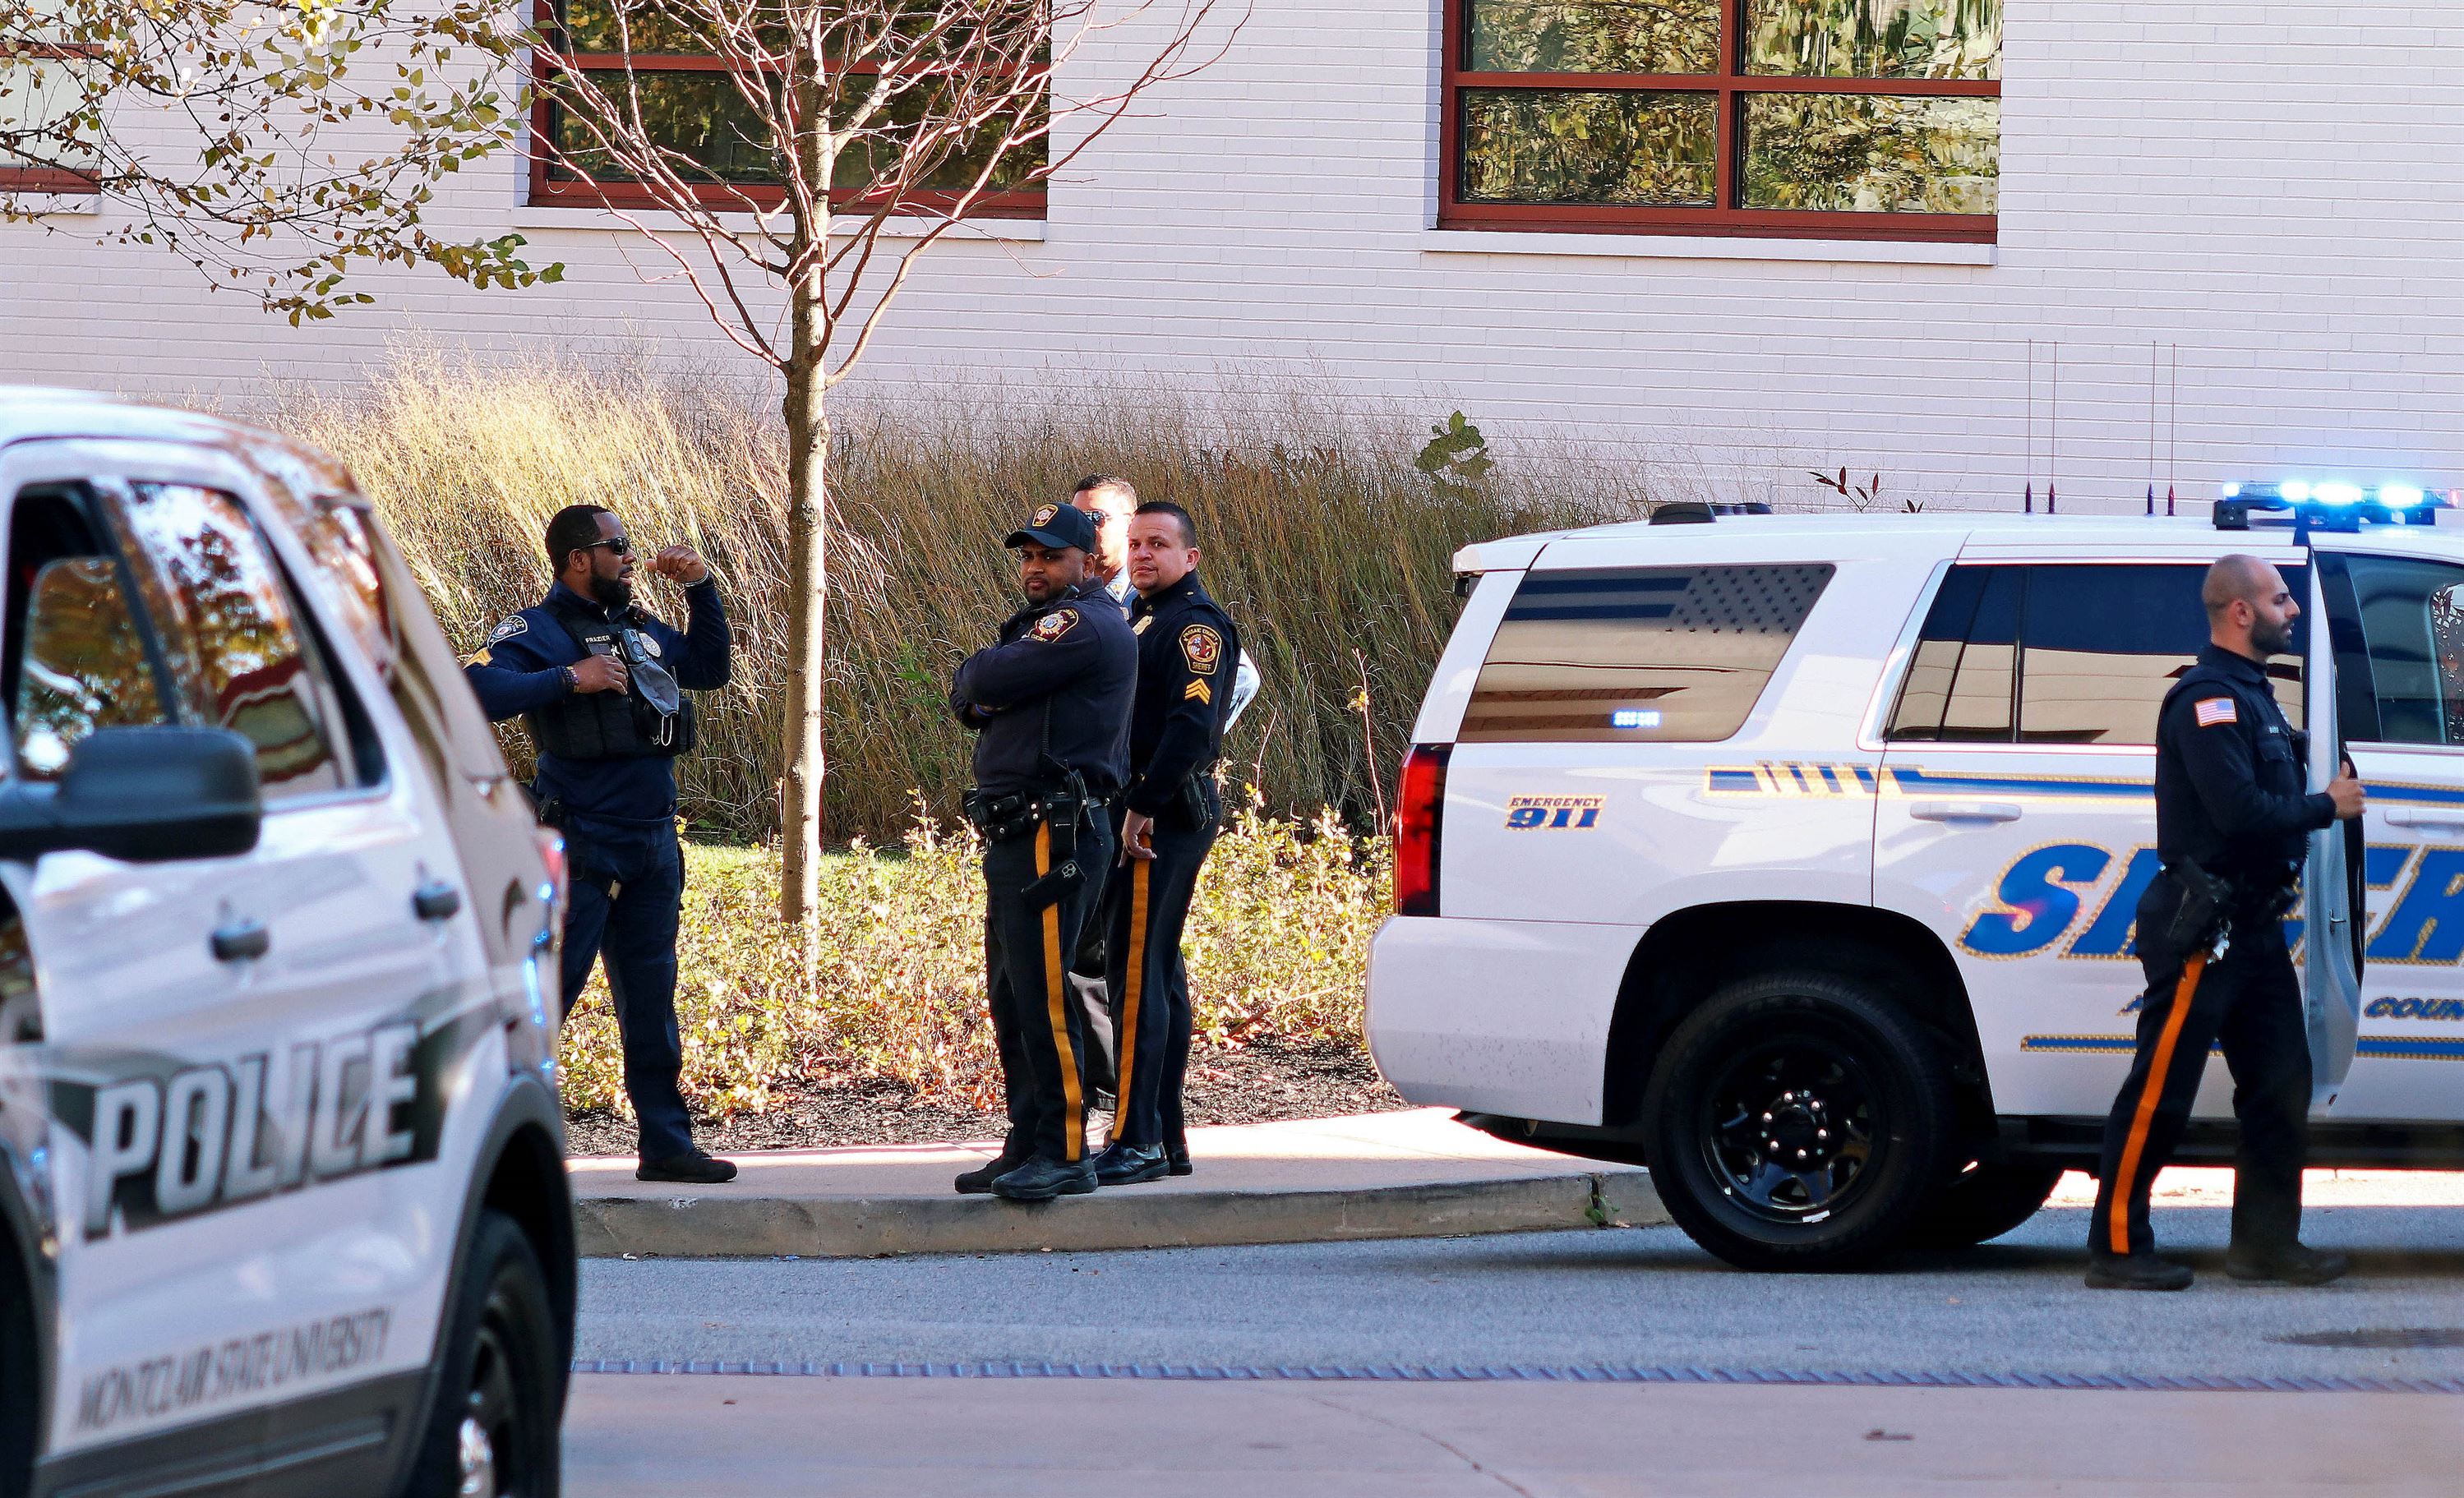 Police at the scene of the arrest shortly after Toro was placed in handcuffs. Julian Rigg | The Montclarion